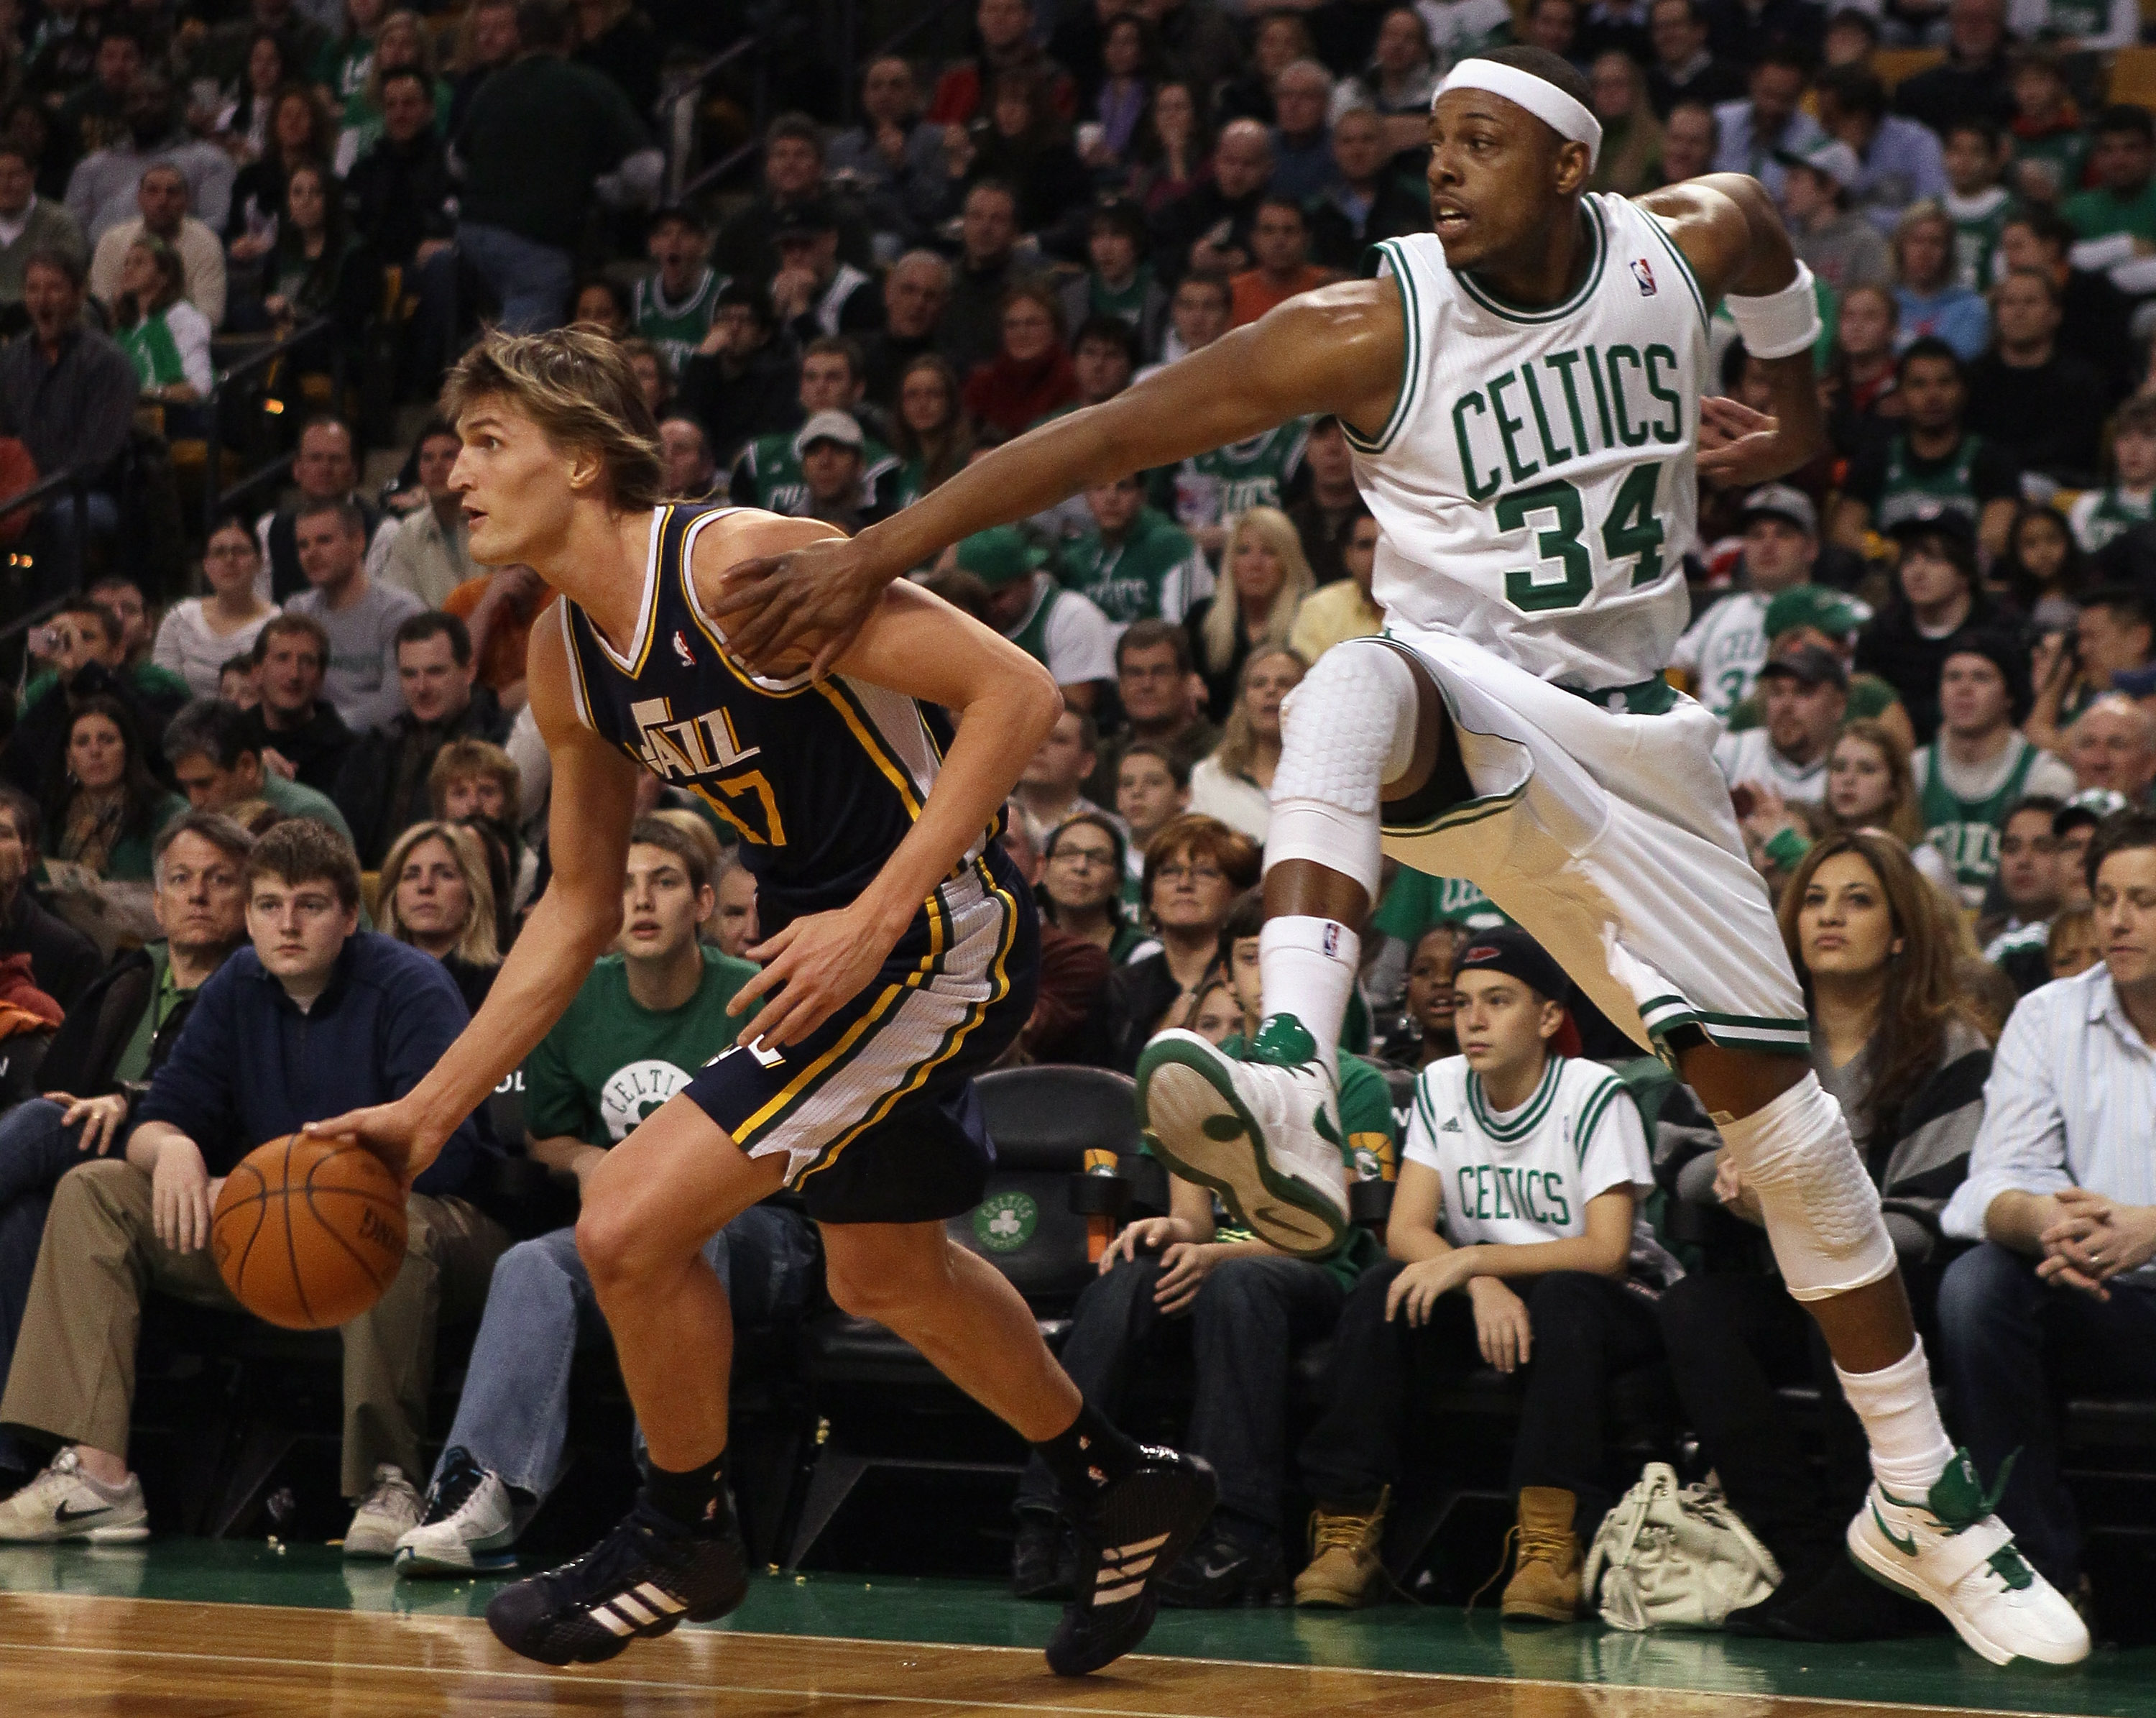 BOSTON, MA - JANUARY 21:  Andrei Kirilenko #47 of the Utah Jazz tries to keep the ball as Paul Pierce #34 of the Boston Celtics jumps to block on January 21, 2011 at the TD Garden in Boston, Massachusetts.  NOTE TO USER: User expressly acknowledges and ag